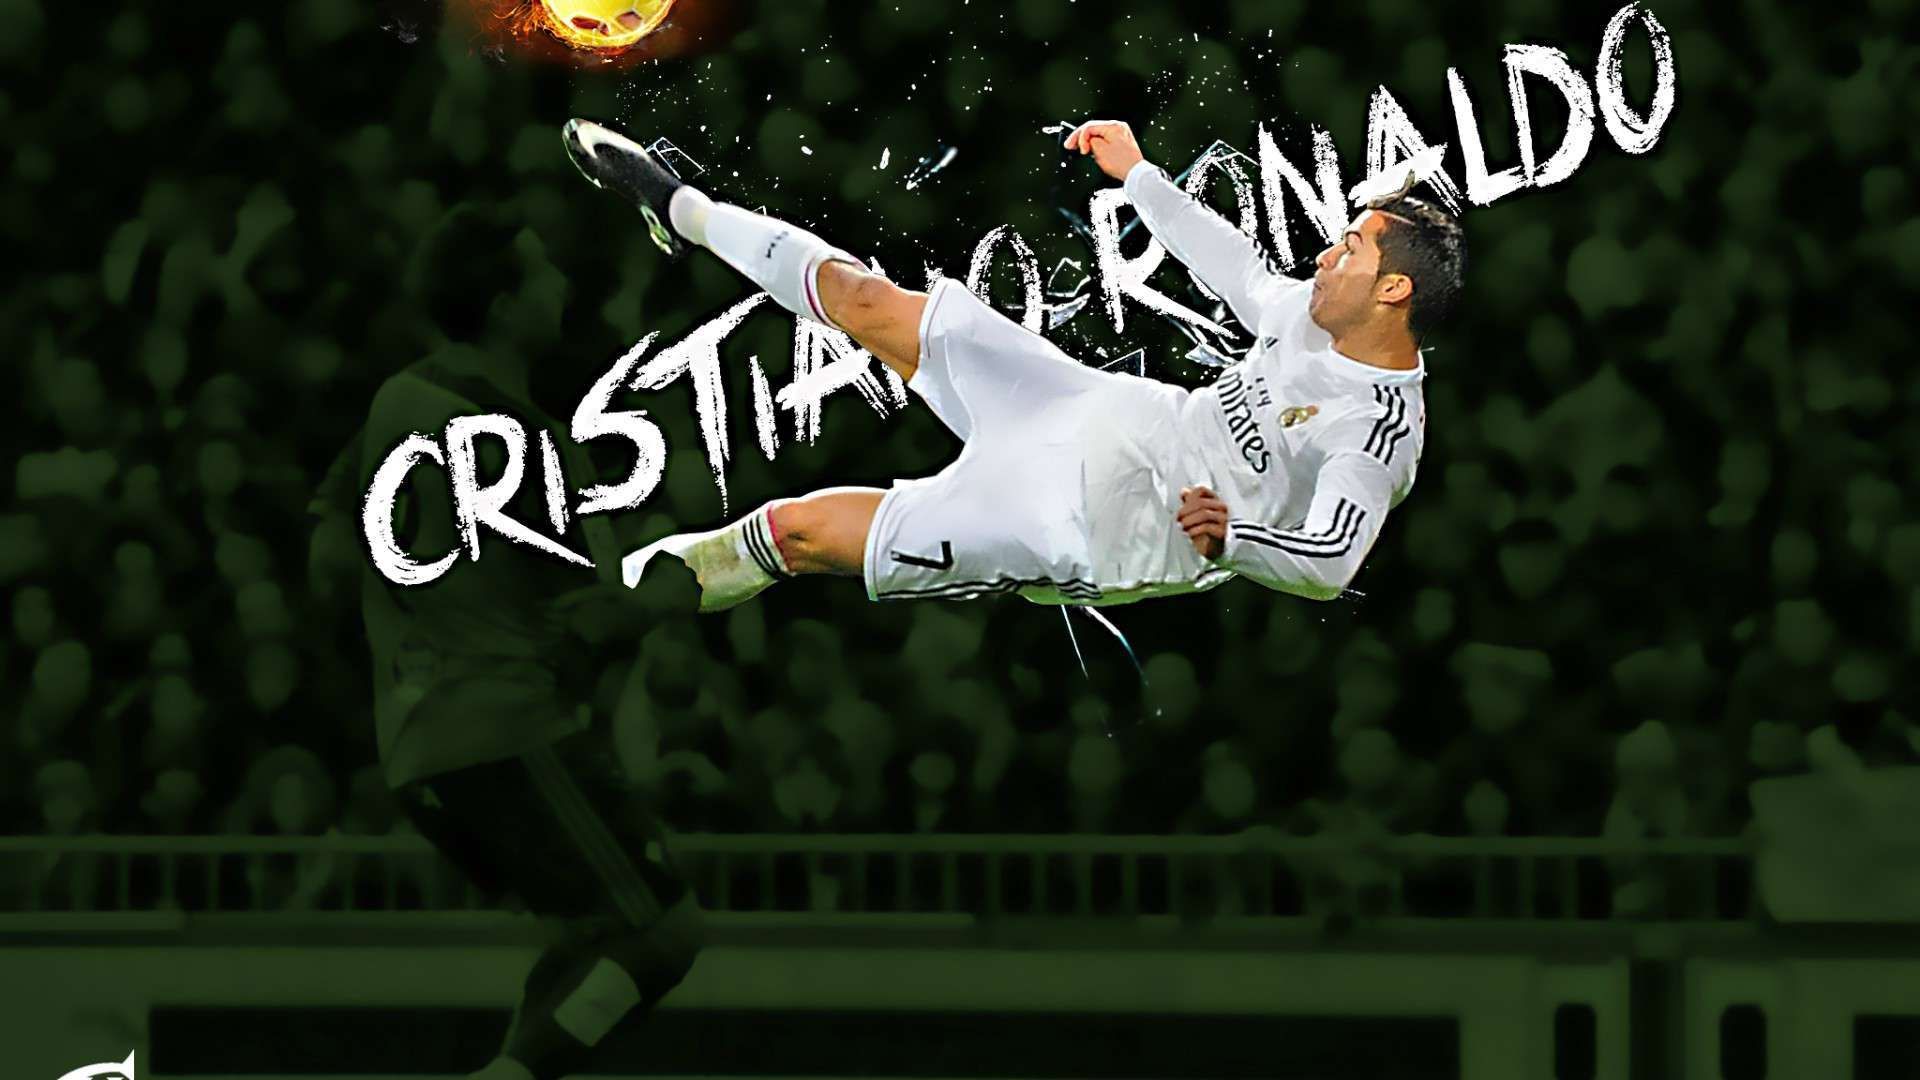 Cr7 Galaxy Wallpapers For Android - Cr 7 Hd , HD Wallpaper & Backgrounds